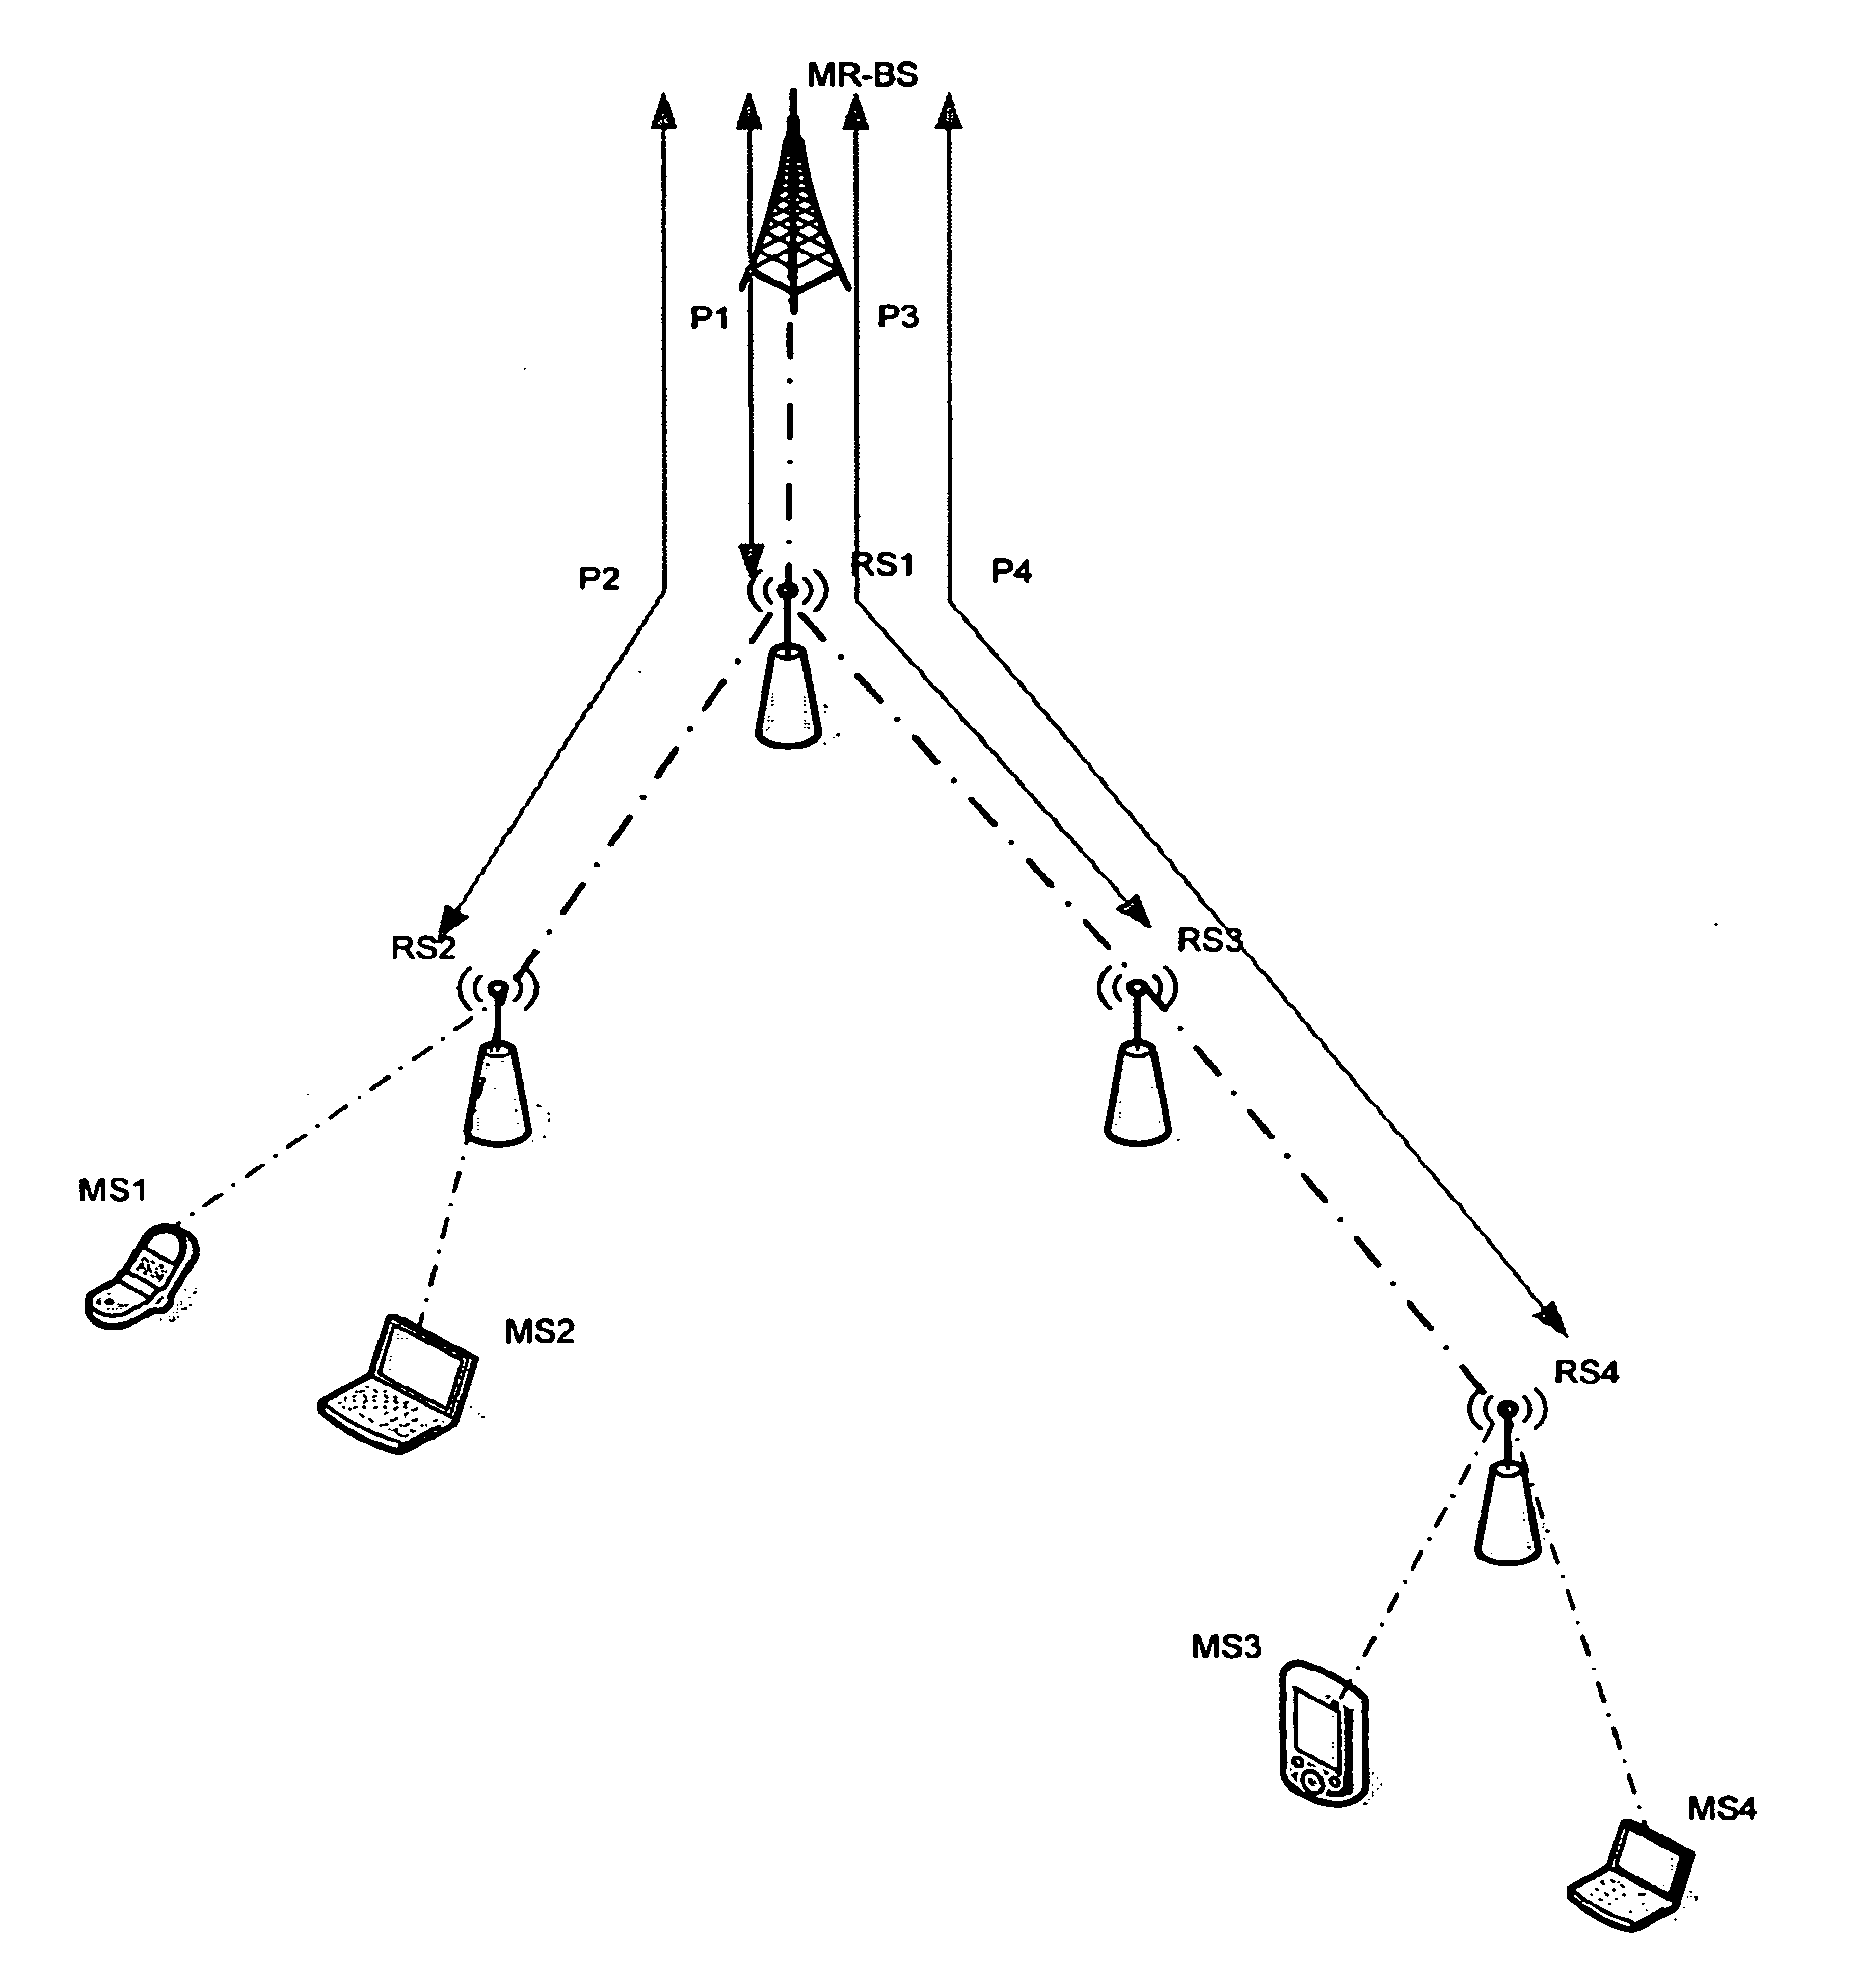 Multicast distribution tree establishment and maintenance in a wireless multi-hop relay communication system